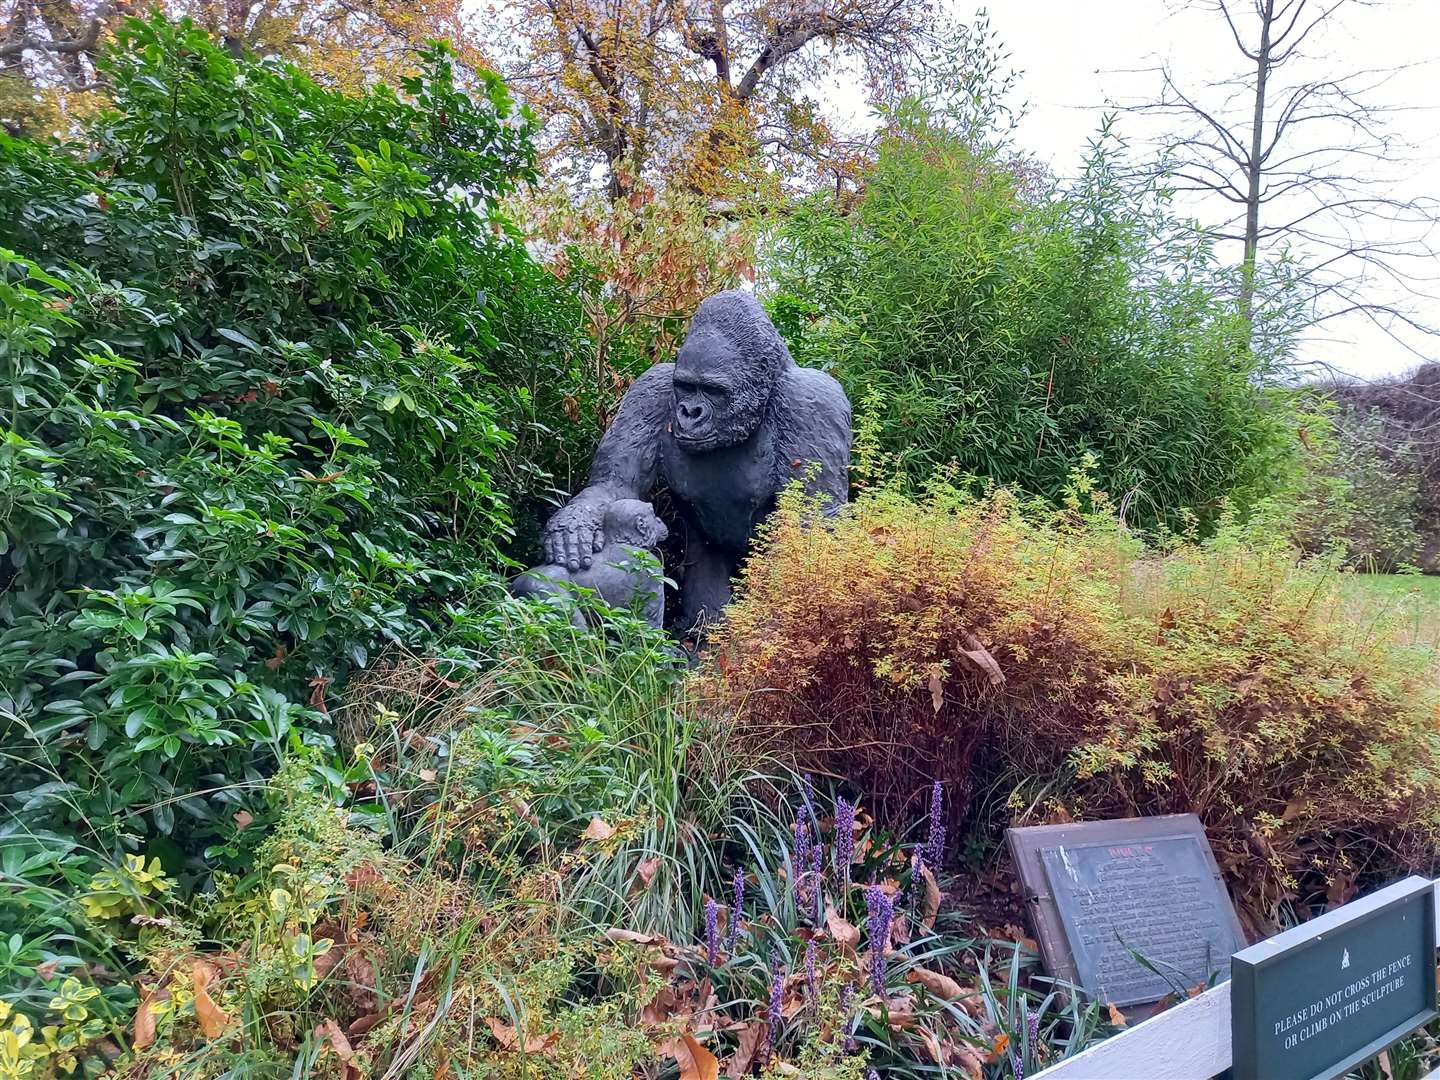 The gorilla statue is the only great ape visitors can see at the far end of the park